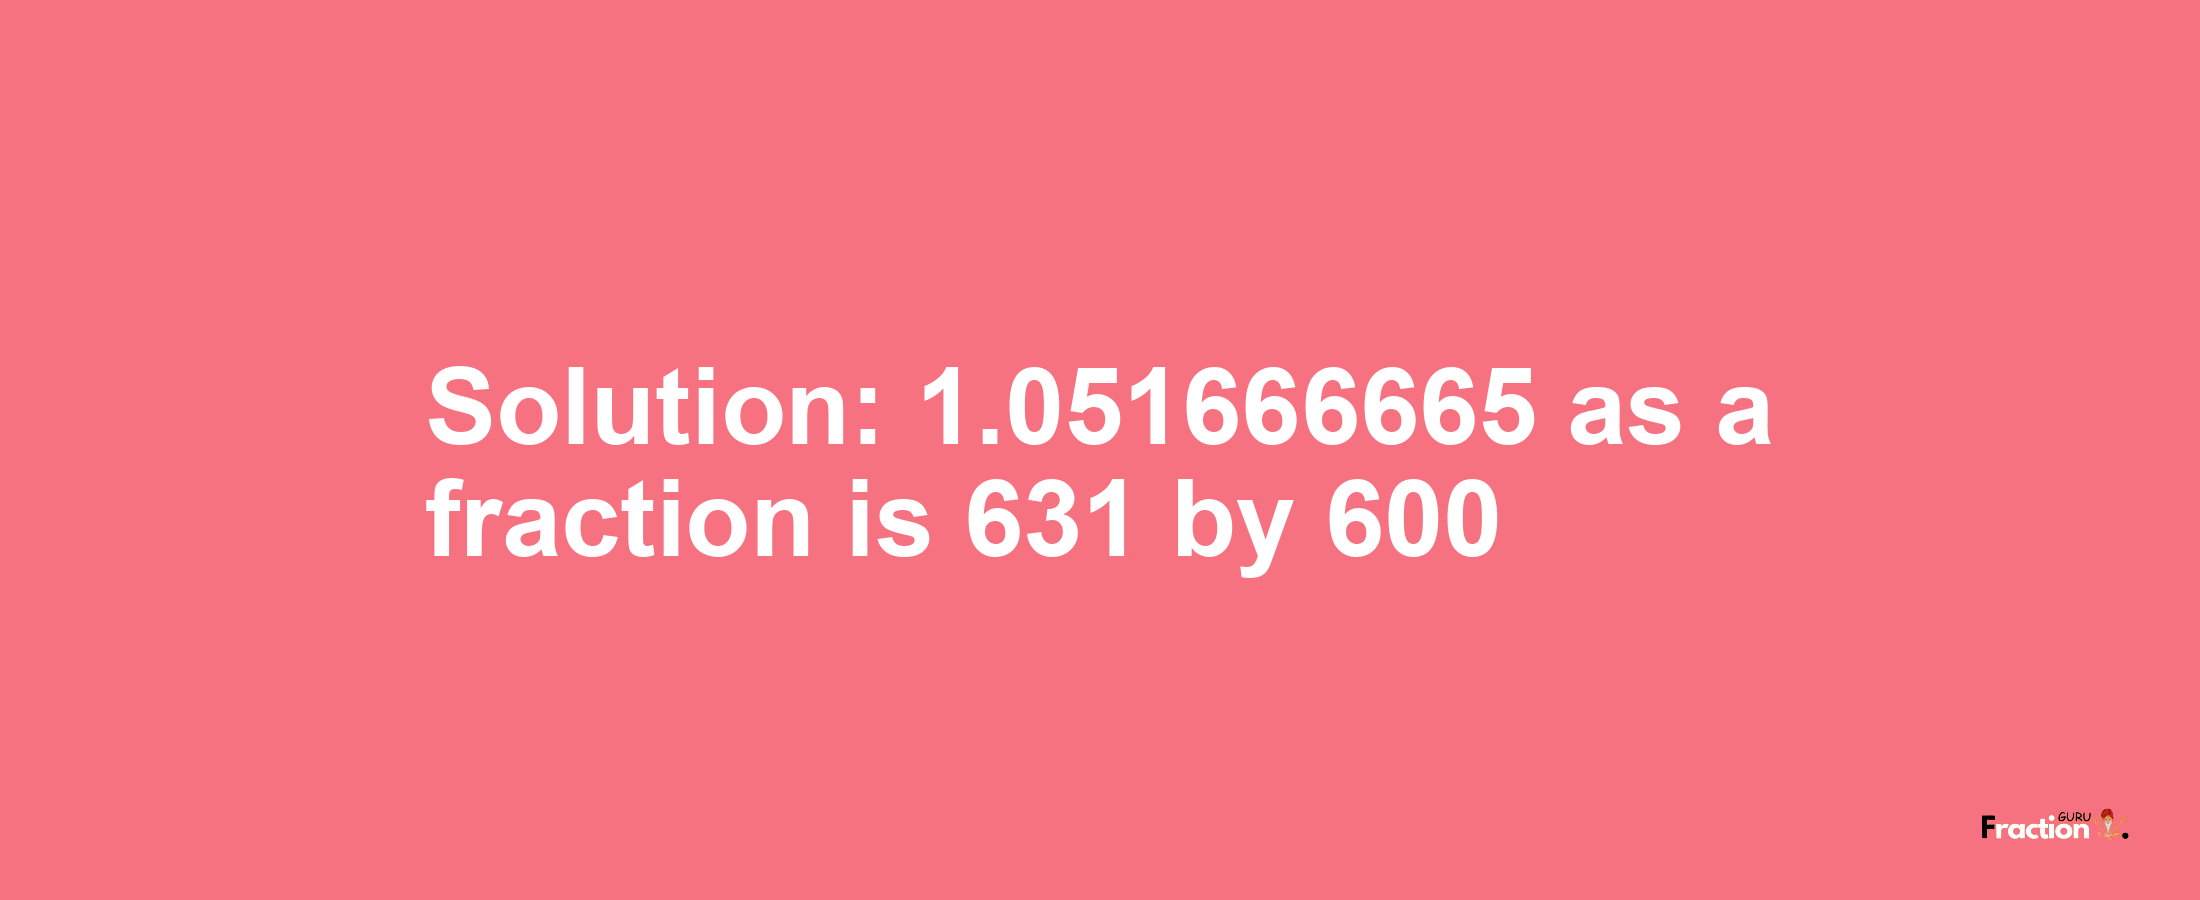 Solution:1.051666665 as a fraction is 631/600